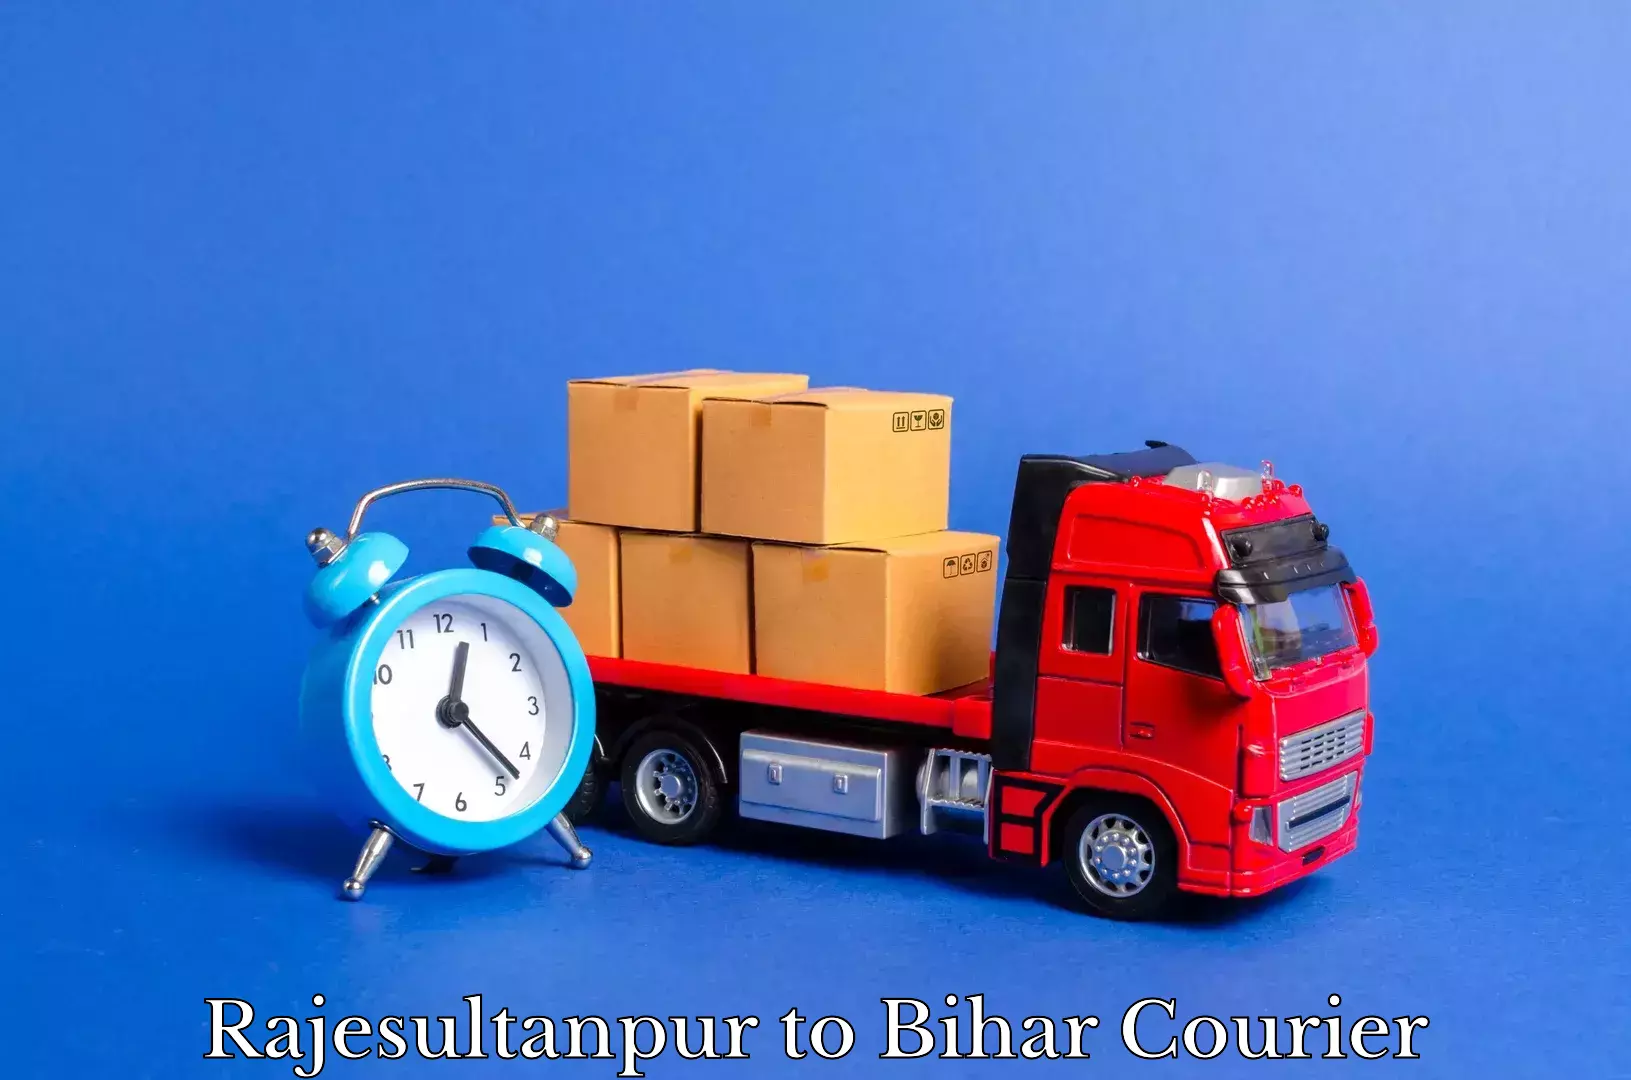 Professional home movers Rajesultanpur to Bihar